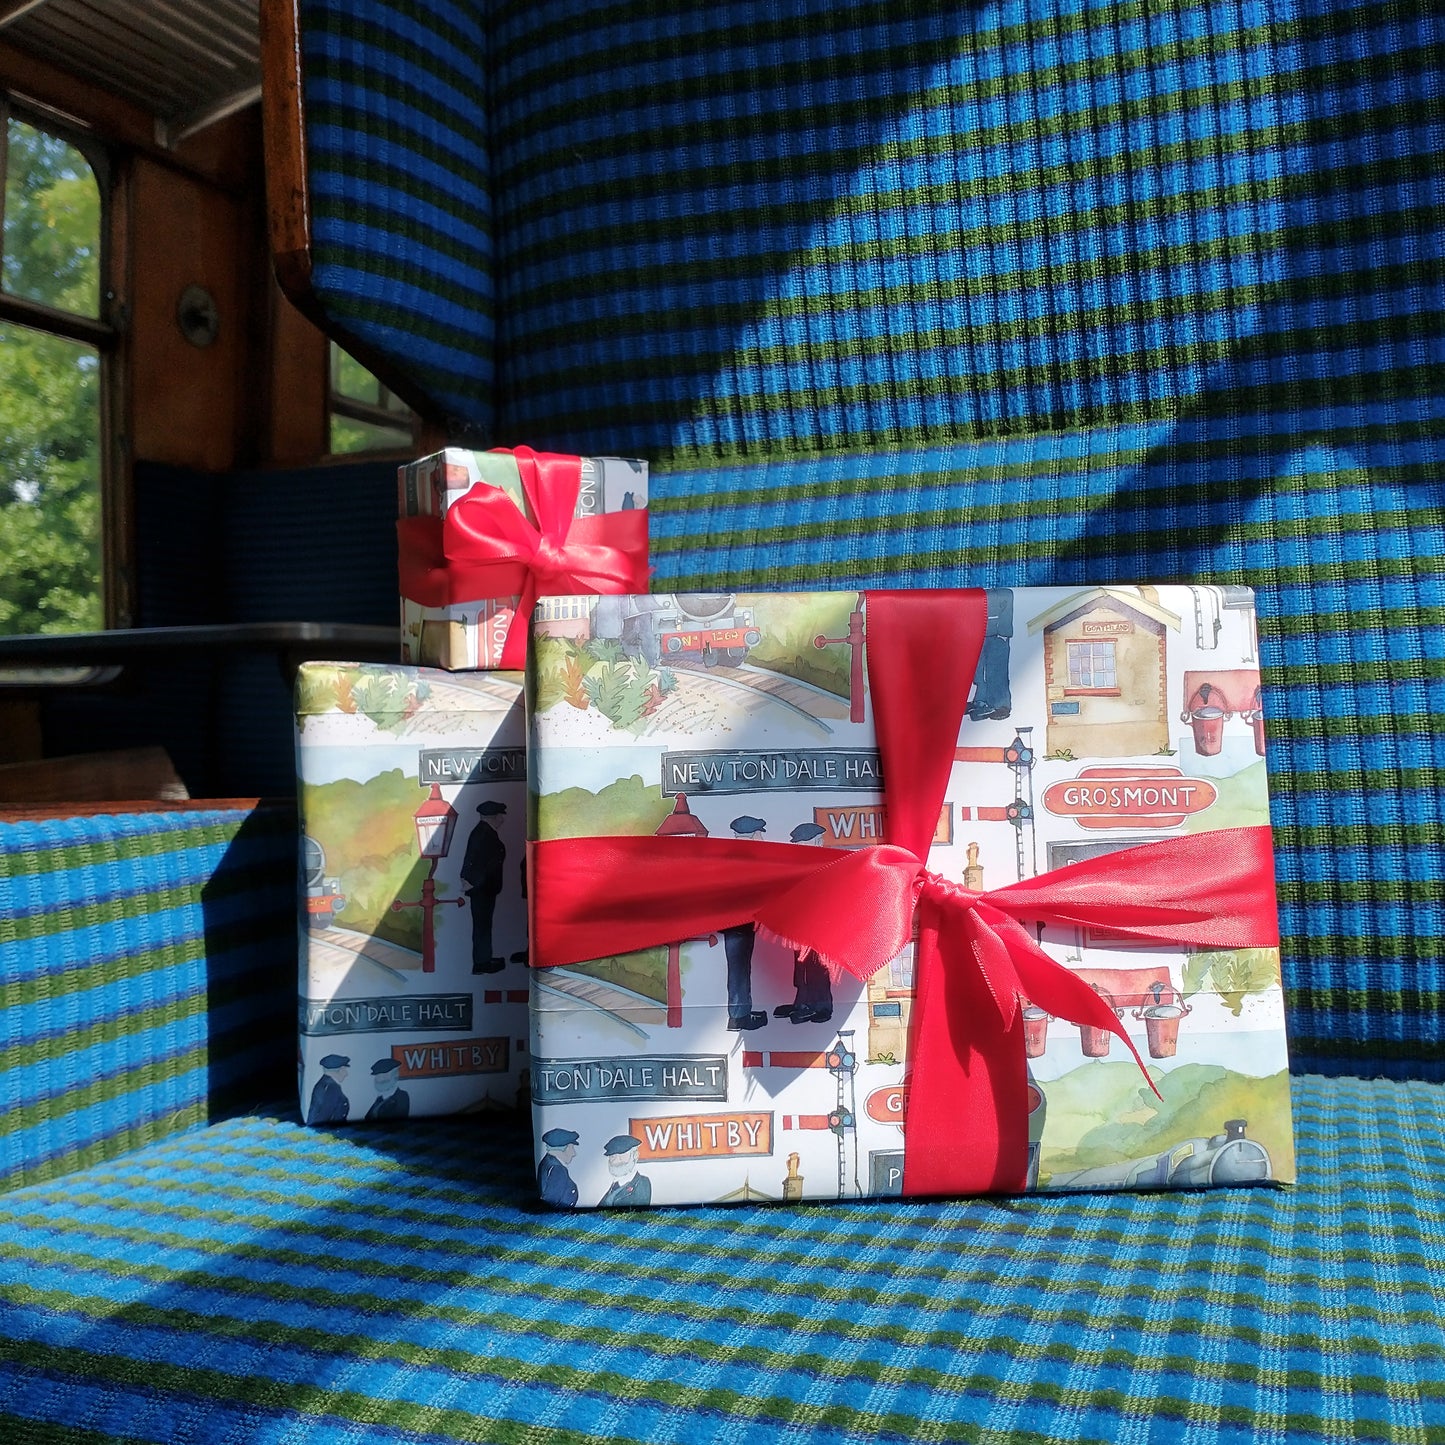 Parcels wrapped in Emma Ball wrapping paper sat on a carriage seat.